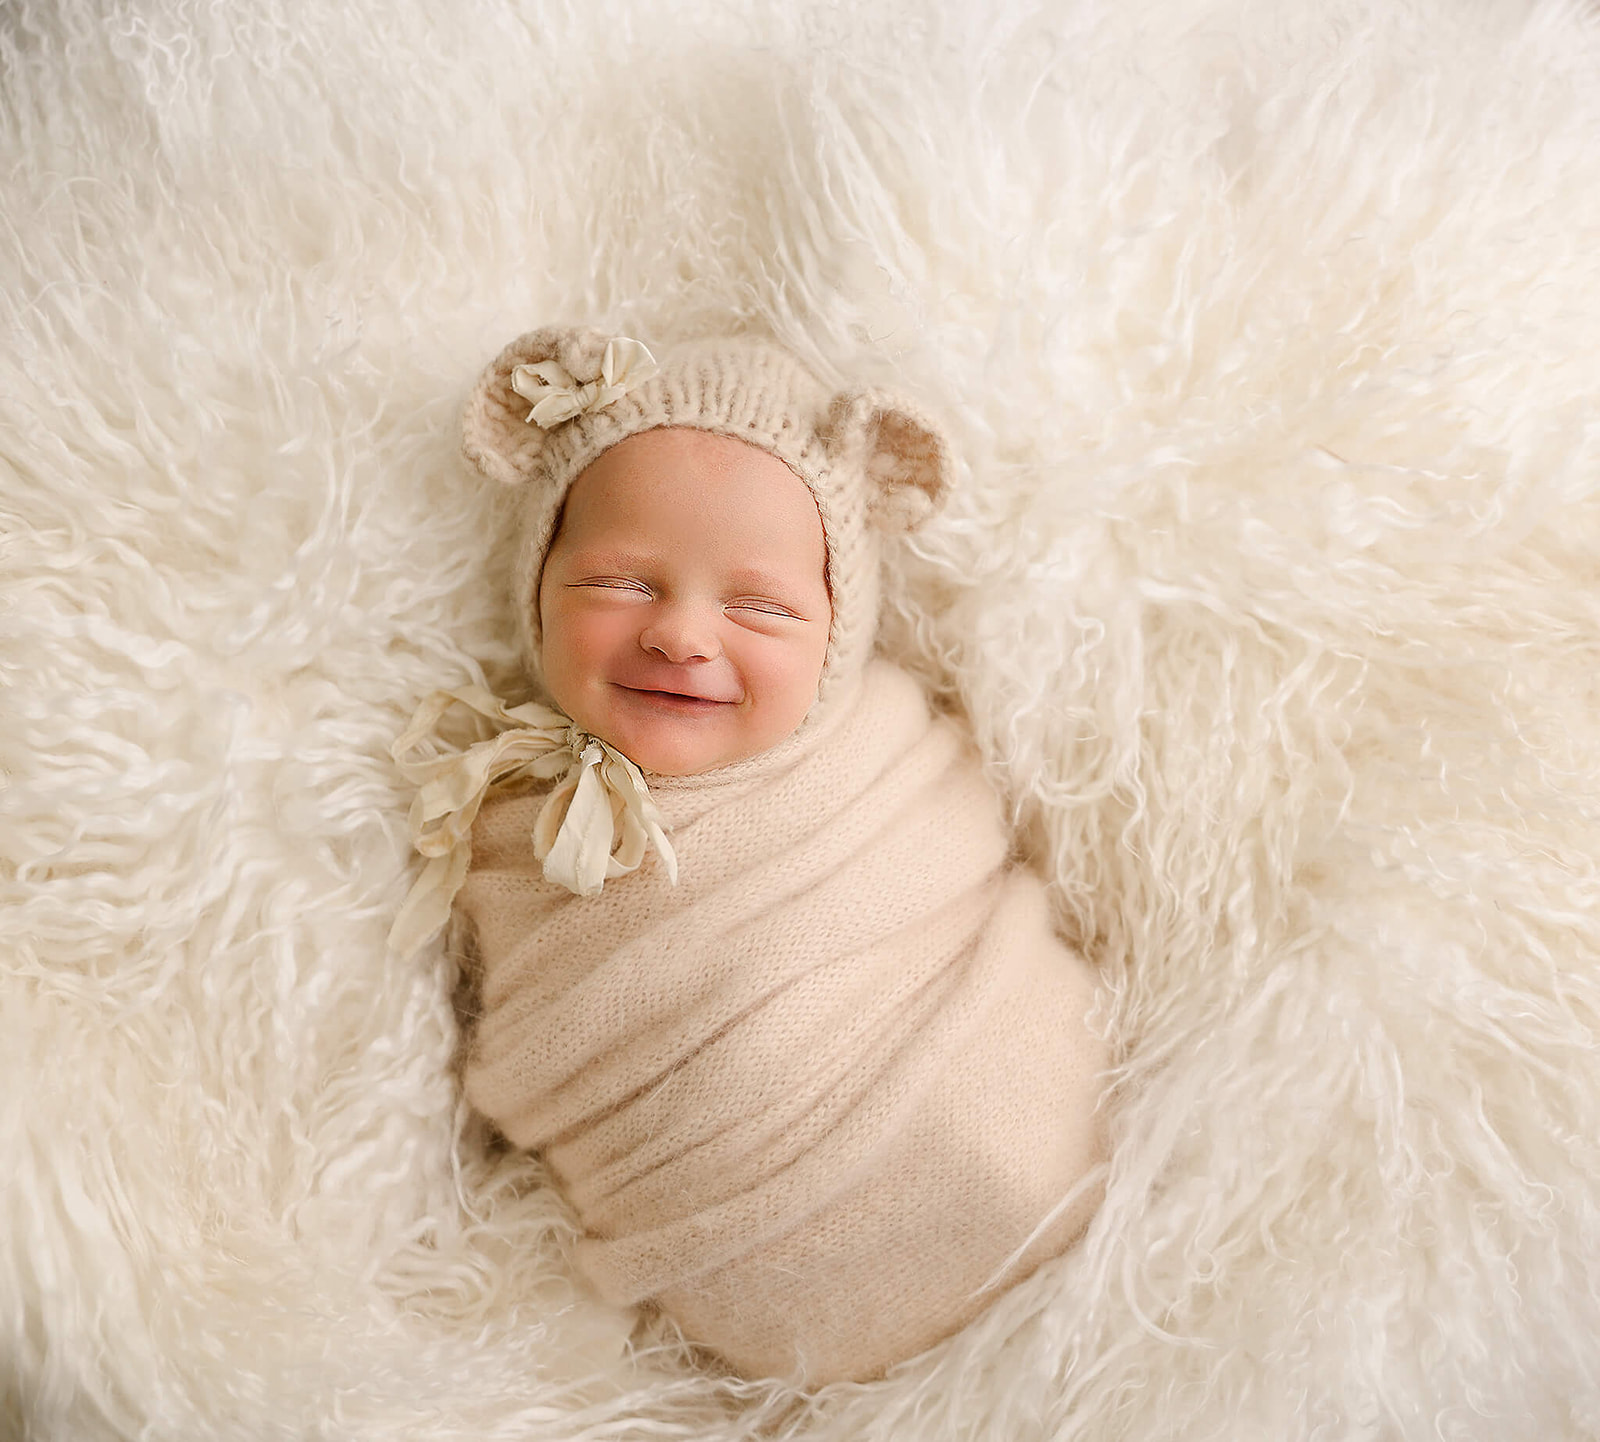 A smiling newborn baby sleeps in a swaddle and knit hat with ears on a furry blanket